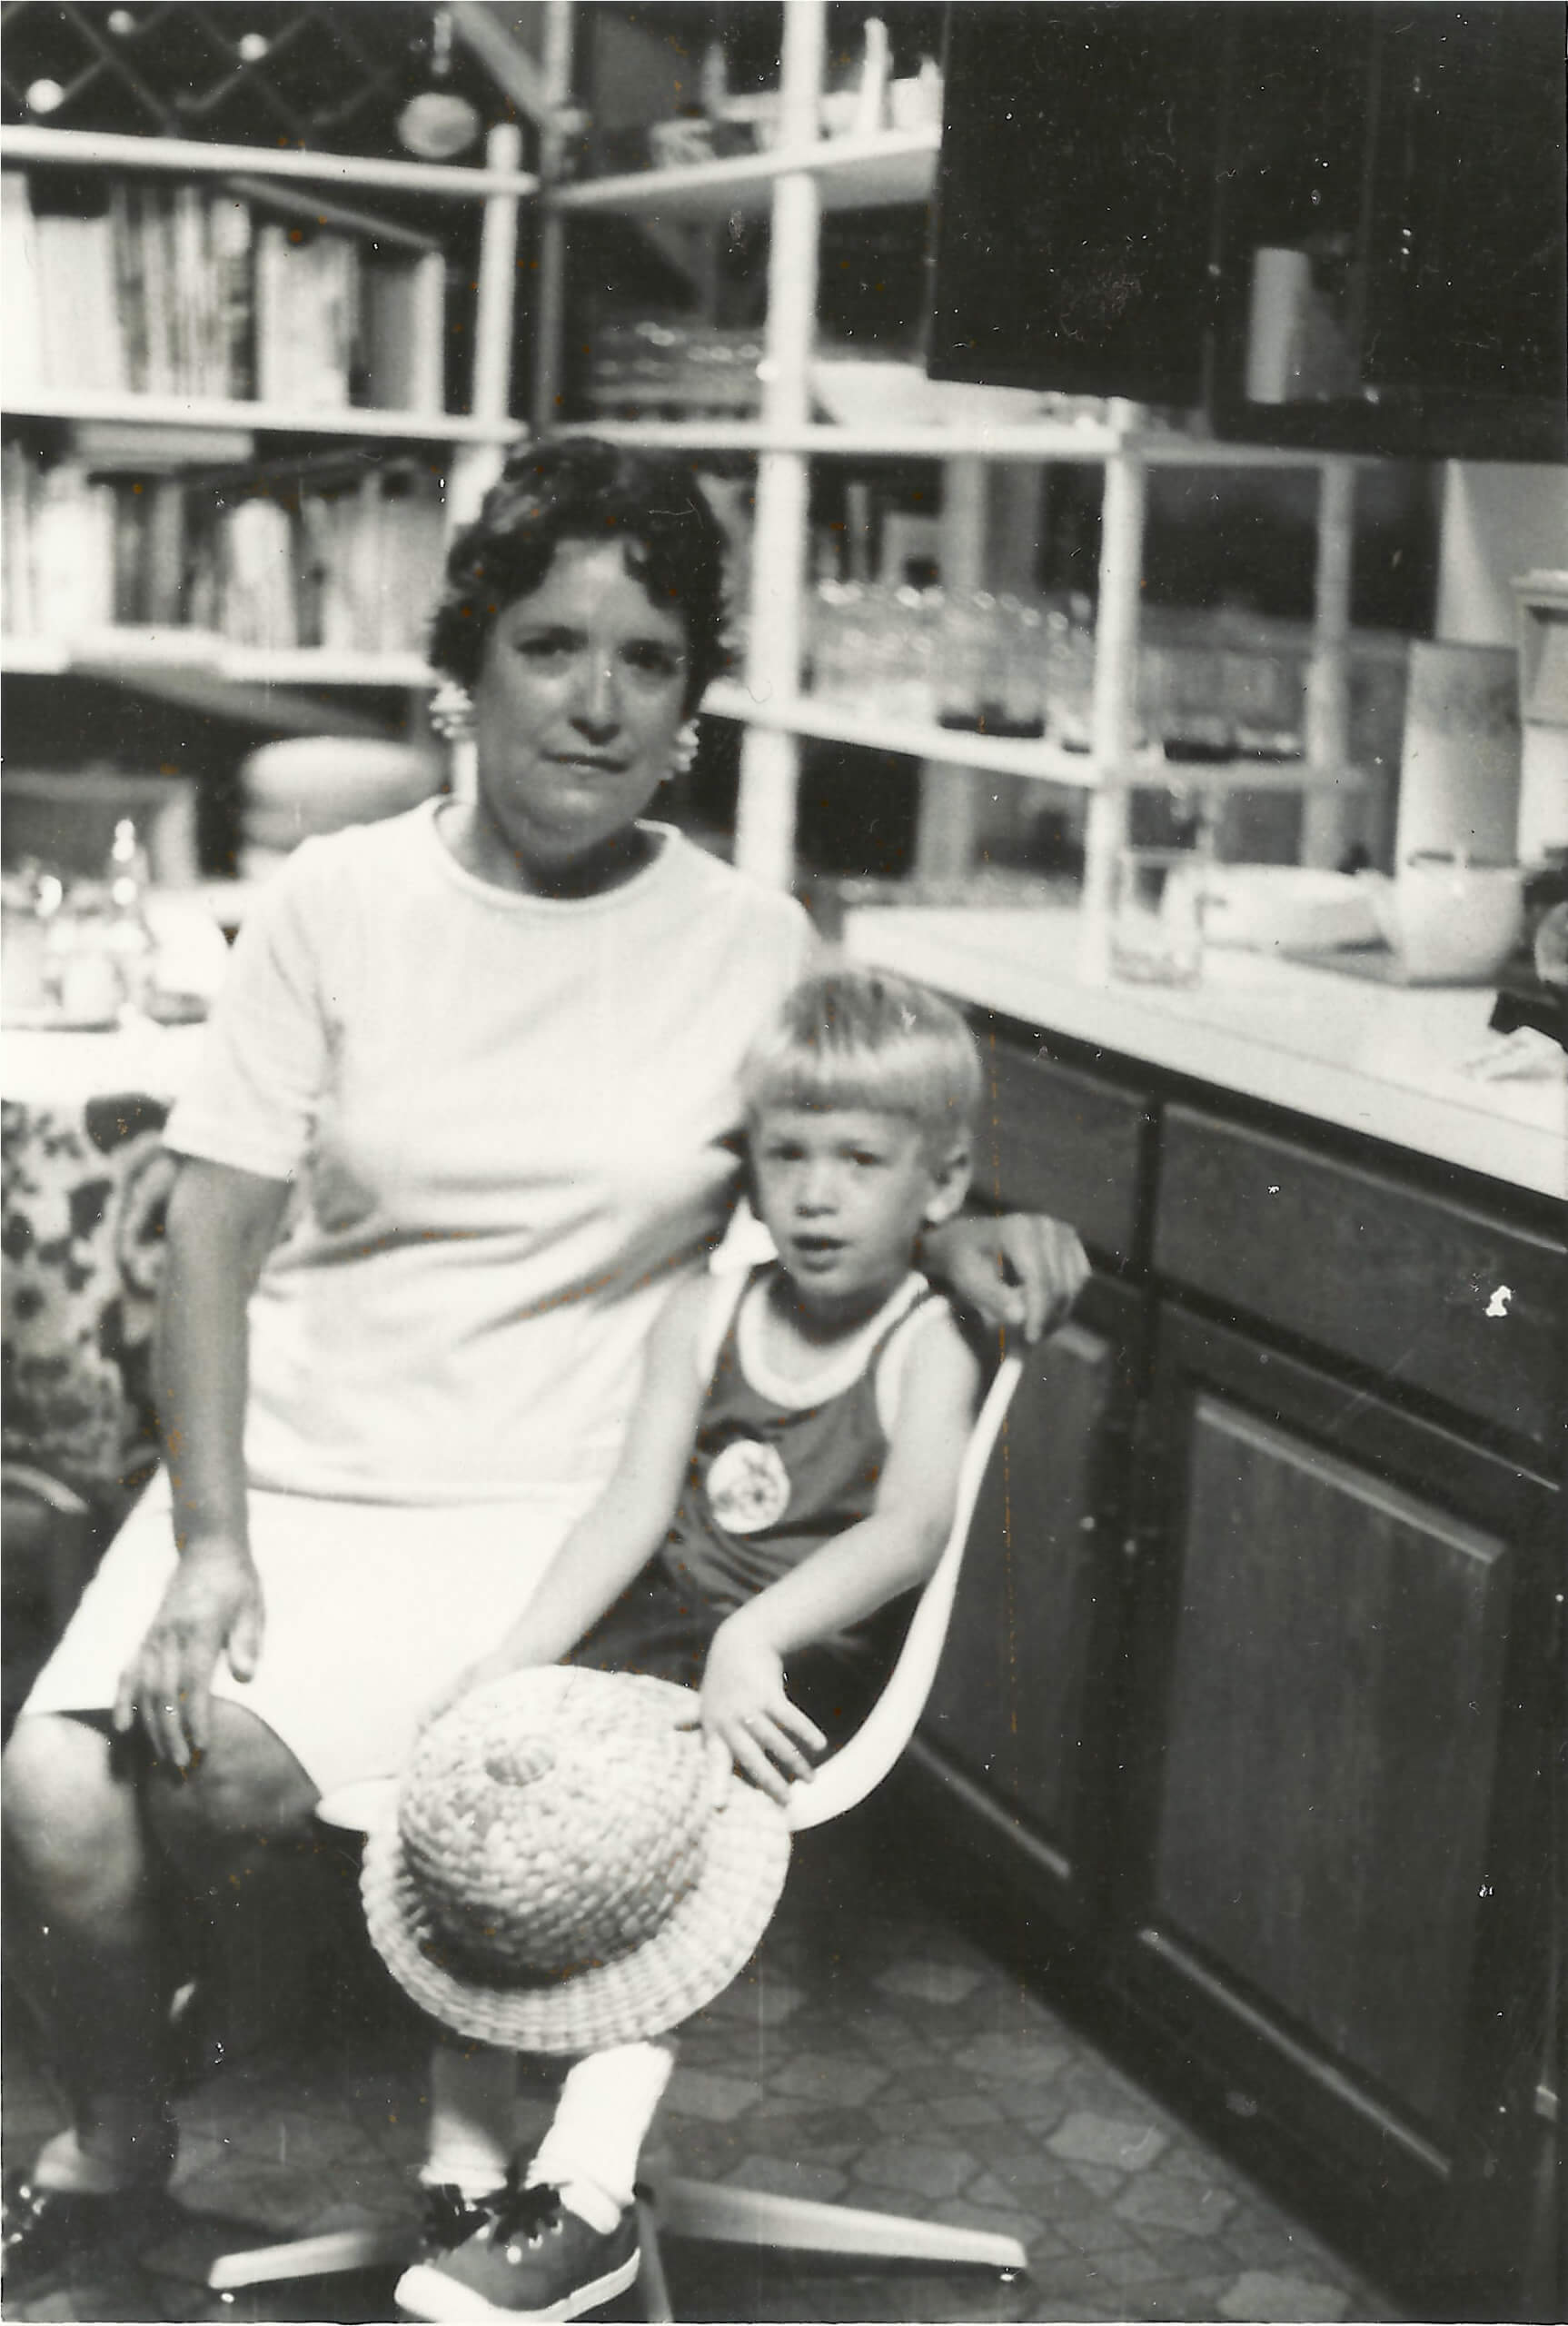 Charlie and Nana Back in the day